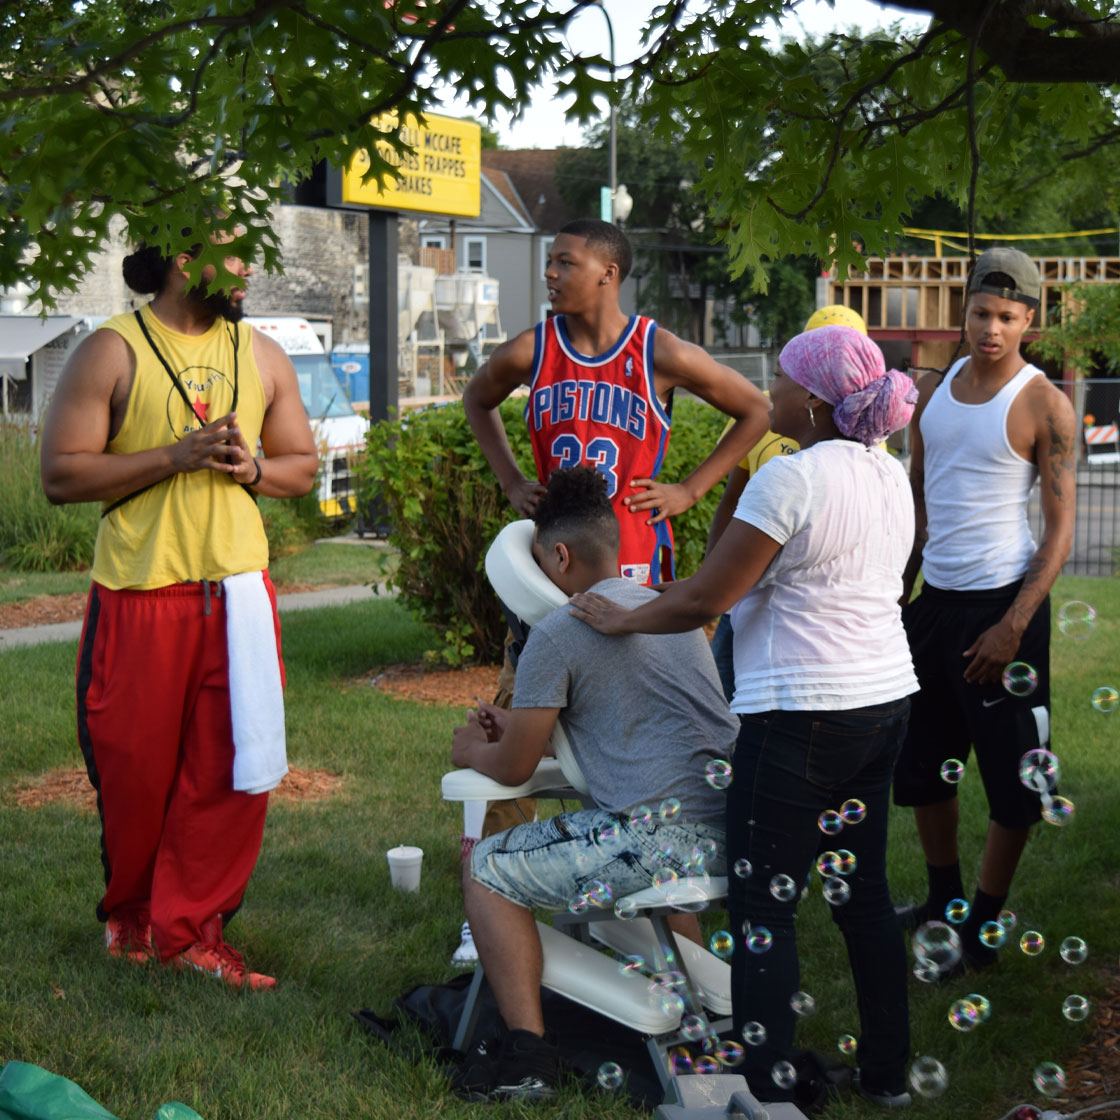 Several people milling about outside, one of them receiving a massage from another